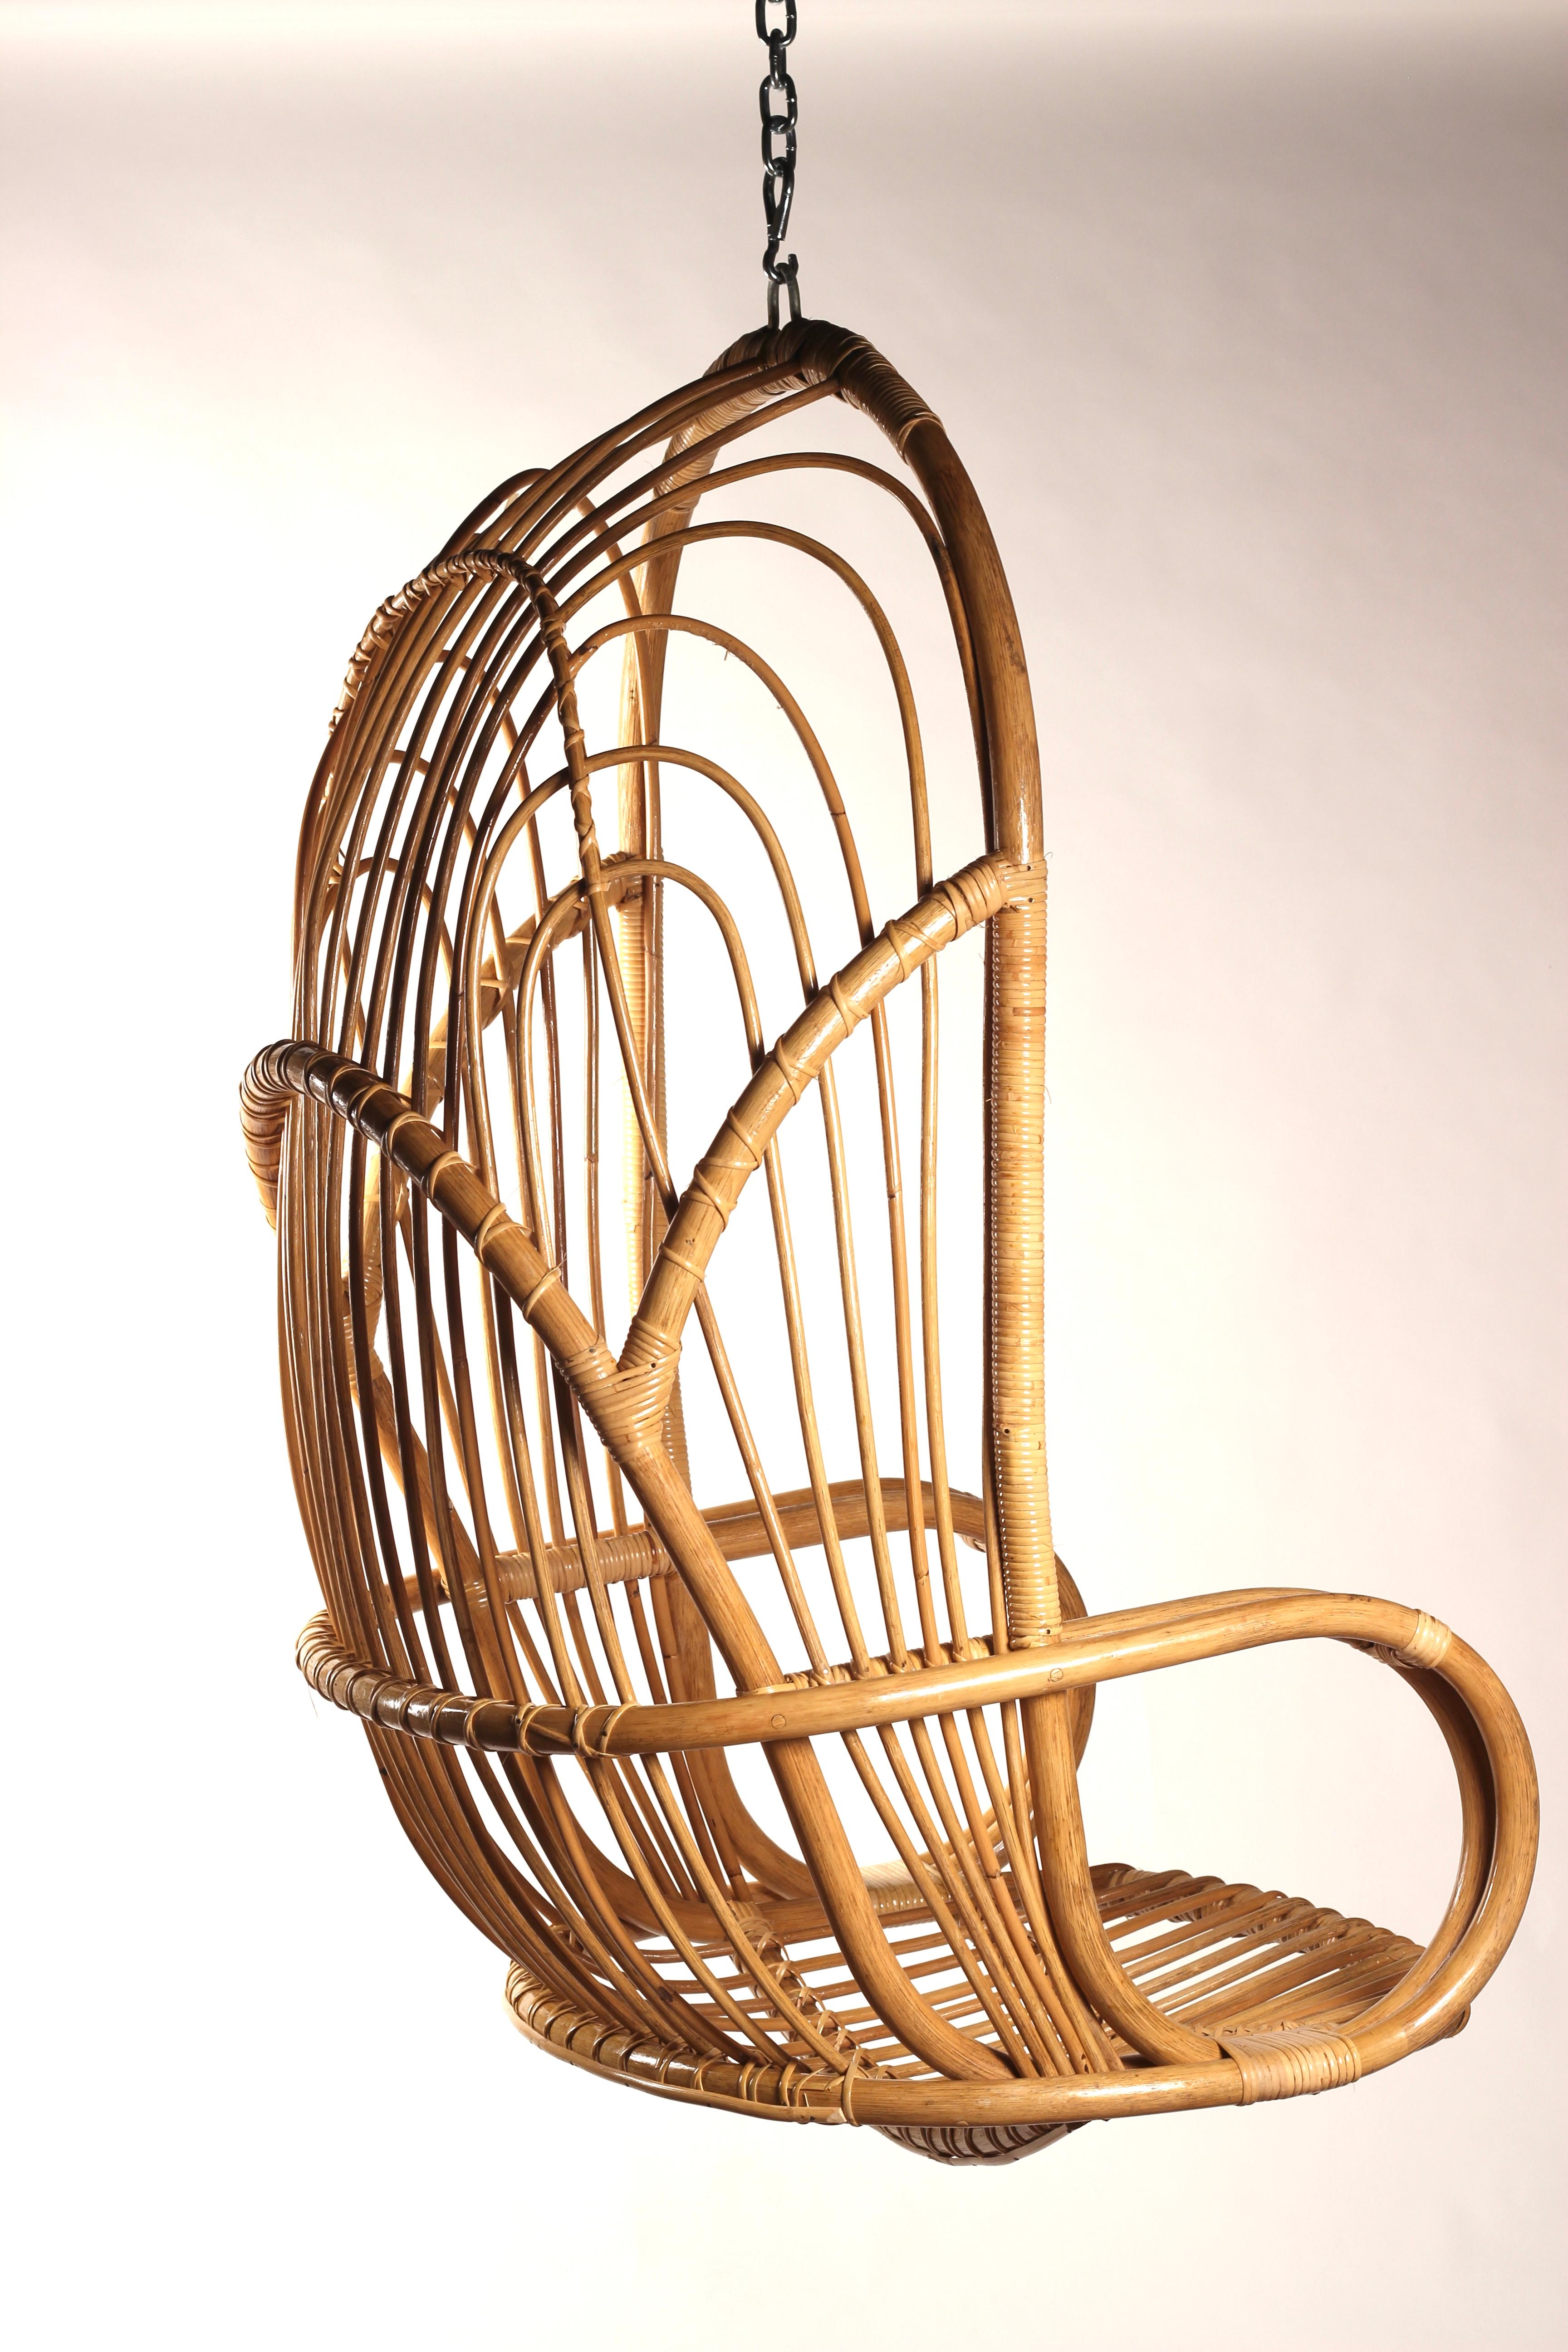 Mid-20th Century Boho Chic Style 1960’s Wicker and Cane Hanging Chair by Rohe Noordwolde For Sale